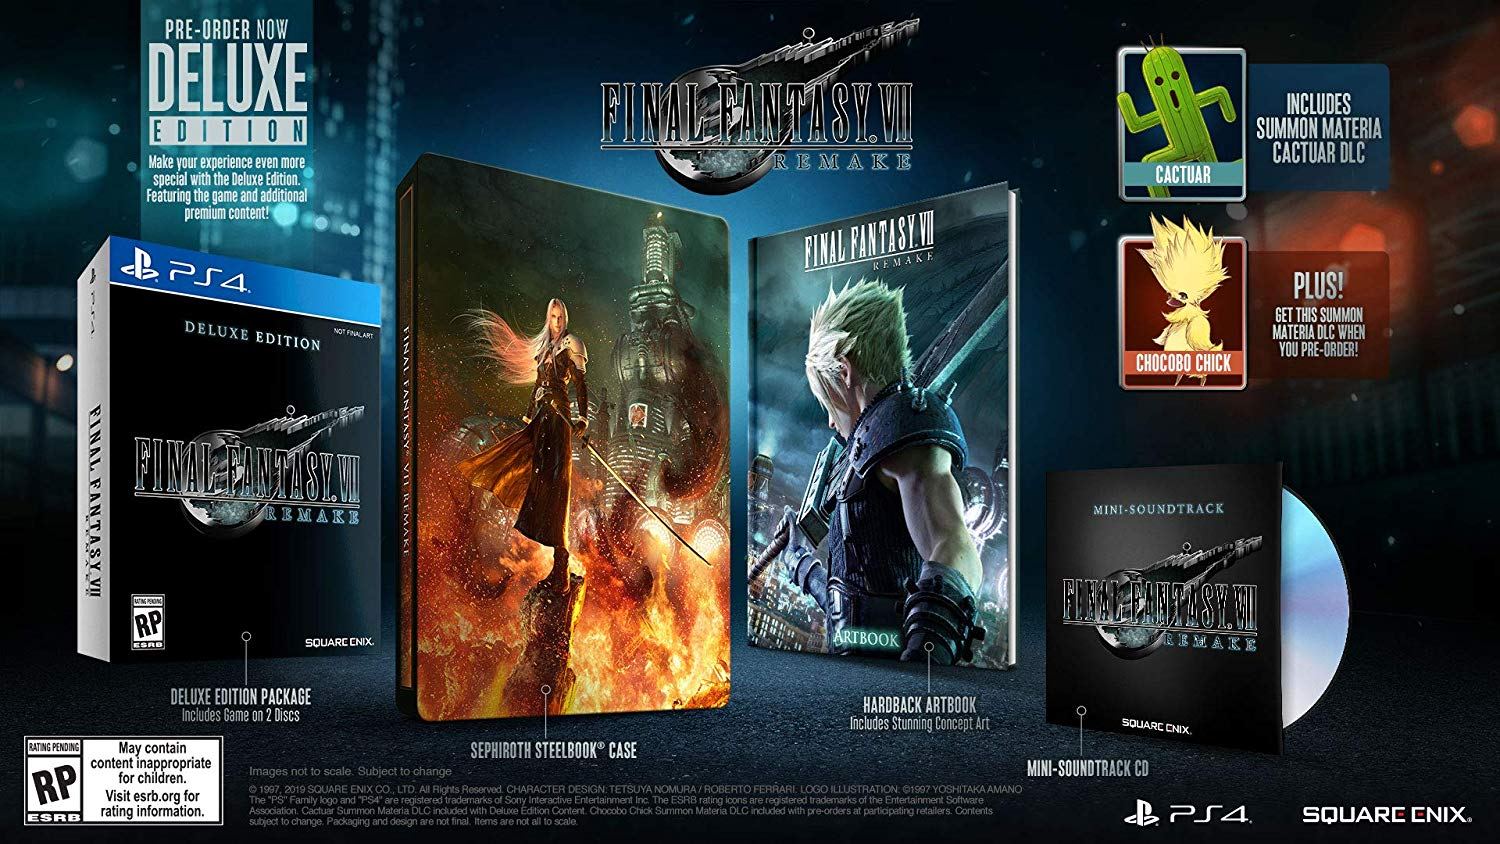 Final Fantasy VII Remake [Deluxe Edition] for PlayStation 4